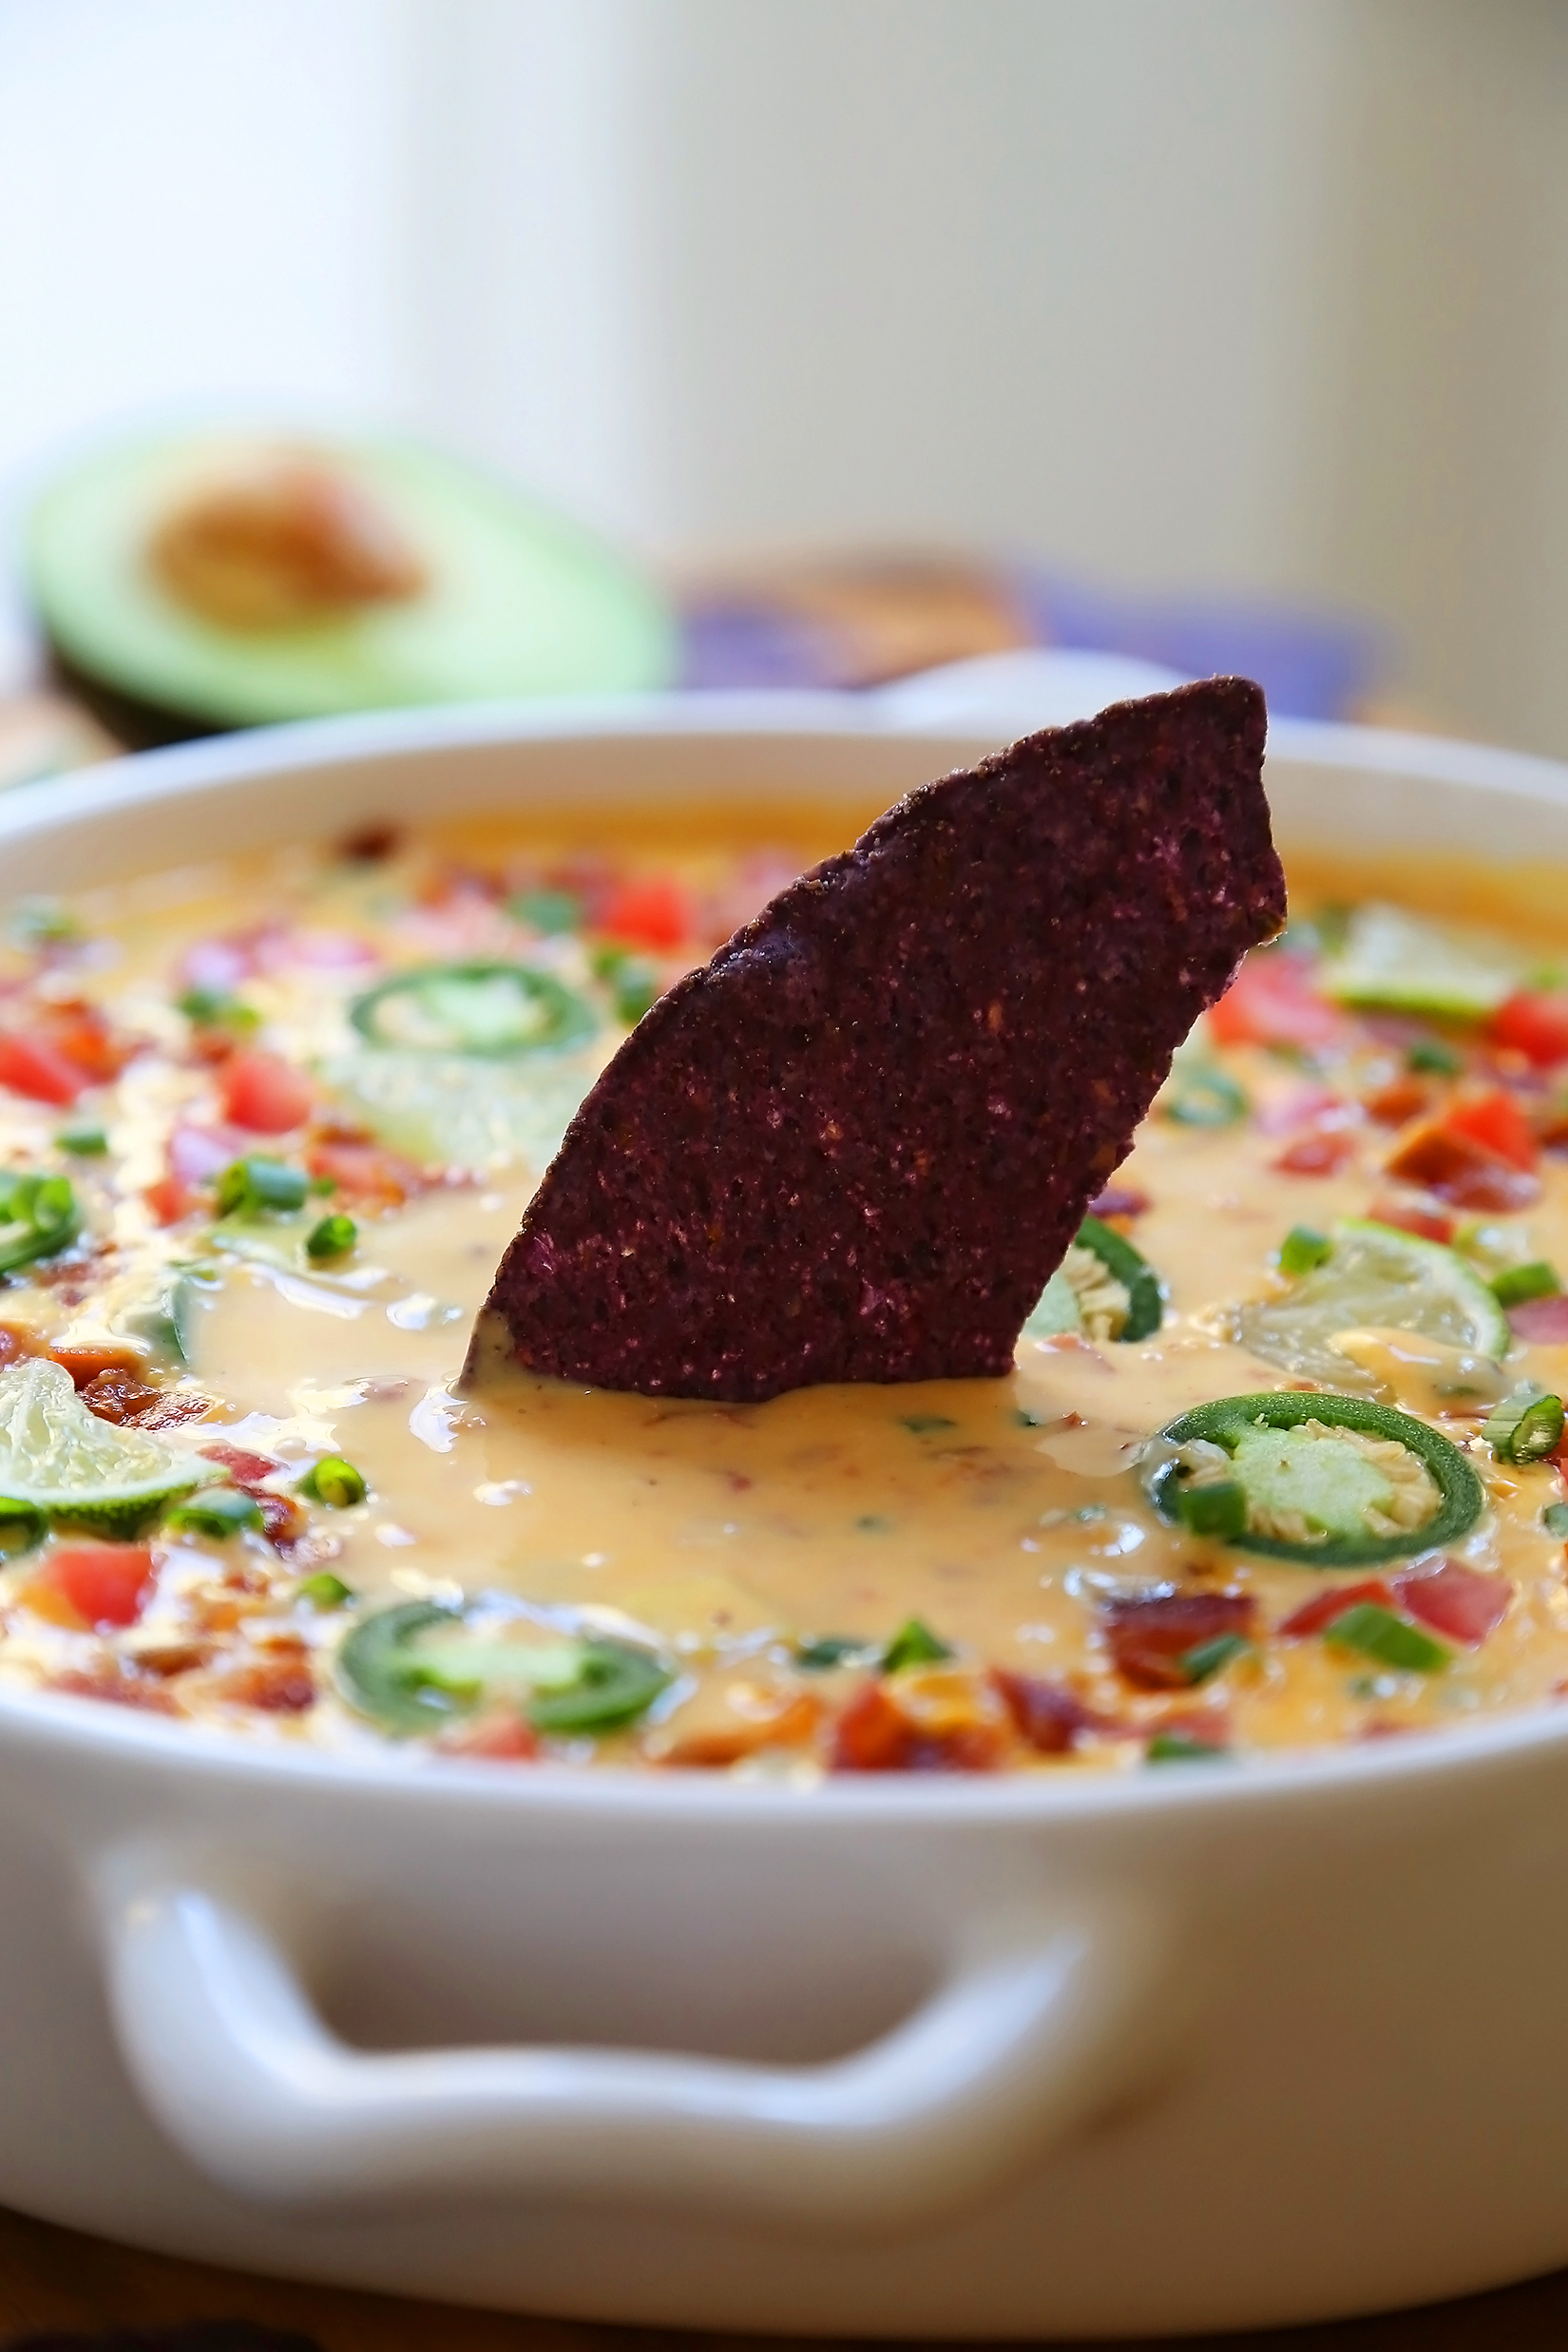 2-Ingredient CrockPot Queso Dip - So easy, cheesy and full of flavor for parties and lazy weekends in. Load it up with bacon, tomatoes, jalapenos and your favorite fixin's! Thecomfortofcooking.com